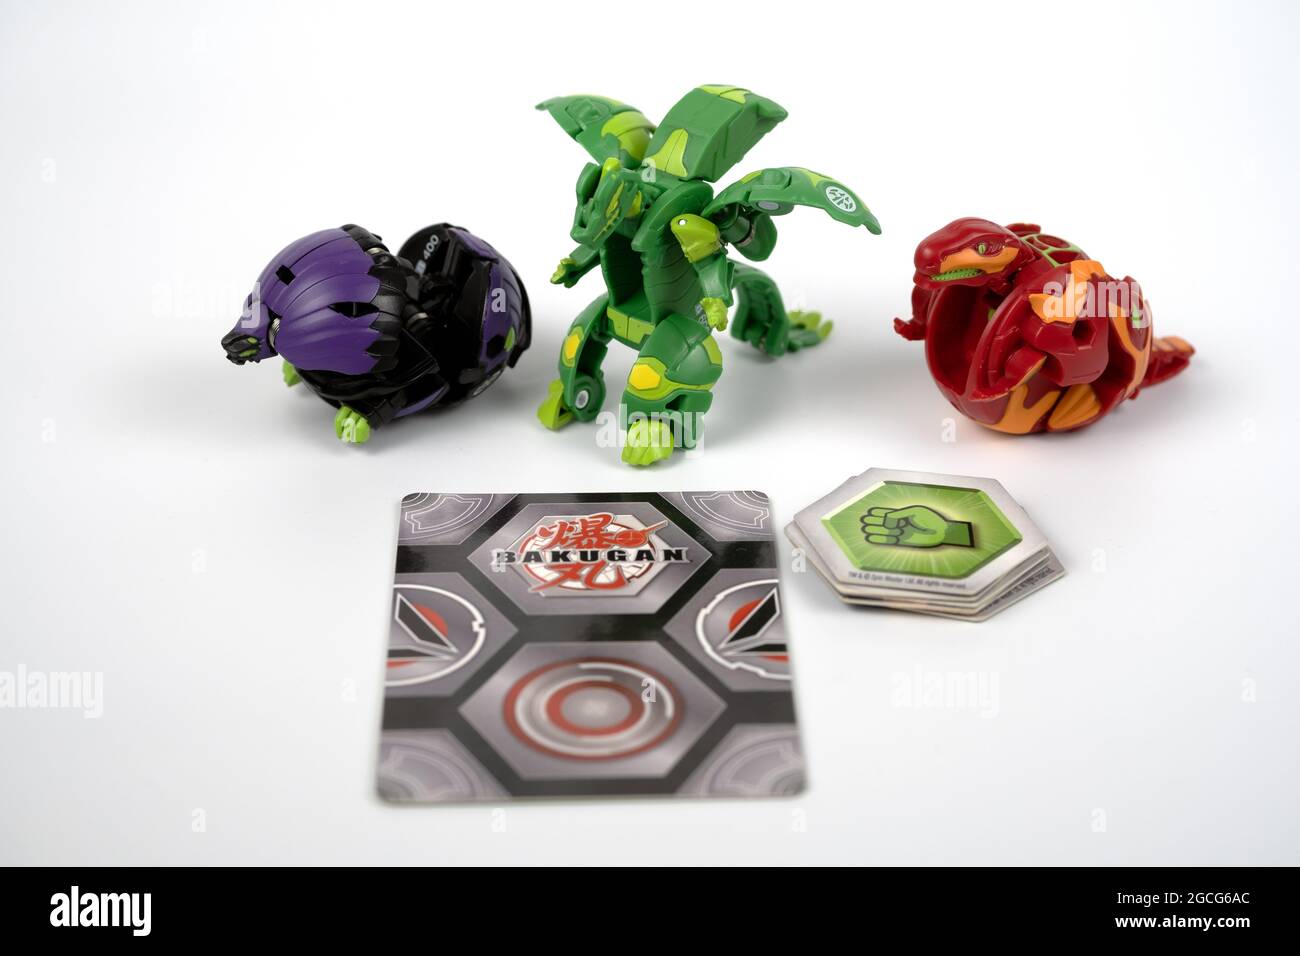 Bakugan Ball toy mini figures with magnetic card and chips. Starter kit. New popular transformer toys. Stafford, United Kingdom, August 8, 2021 Stock Photo